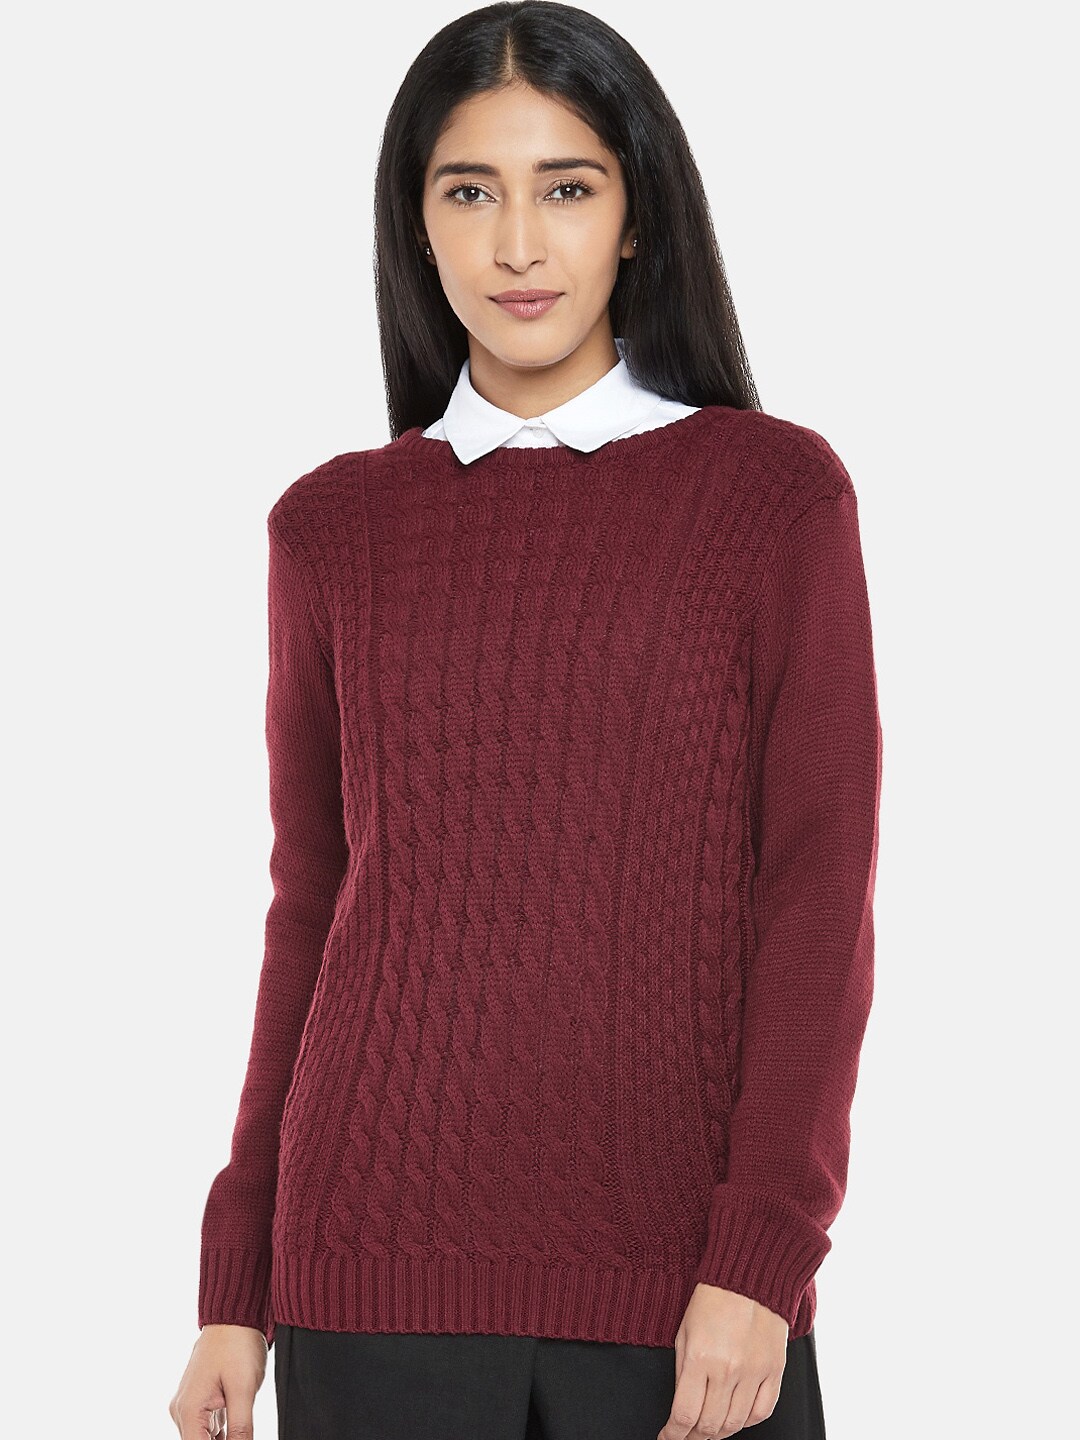 Annabelle by Pantaloons Women Maroon Solid Pullover Sweater Price in India